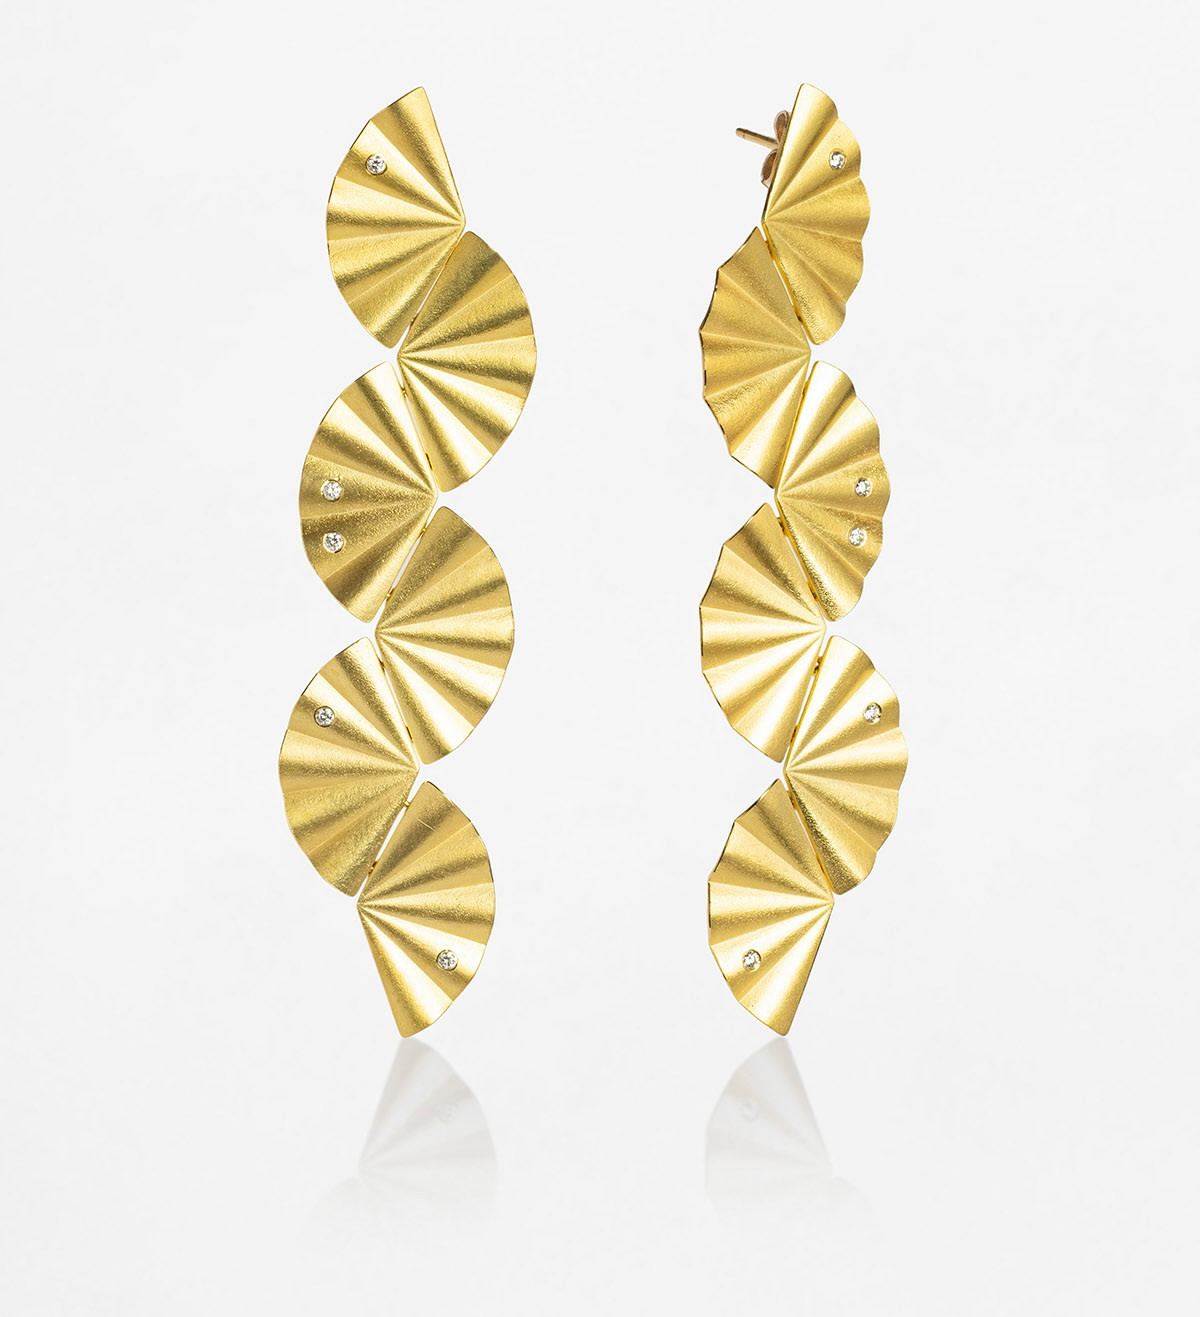 18k gold earrings Maiko 80mm with diamonds 0,15ct